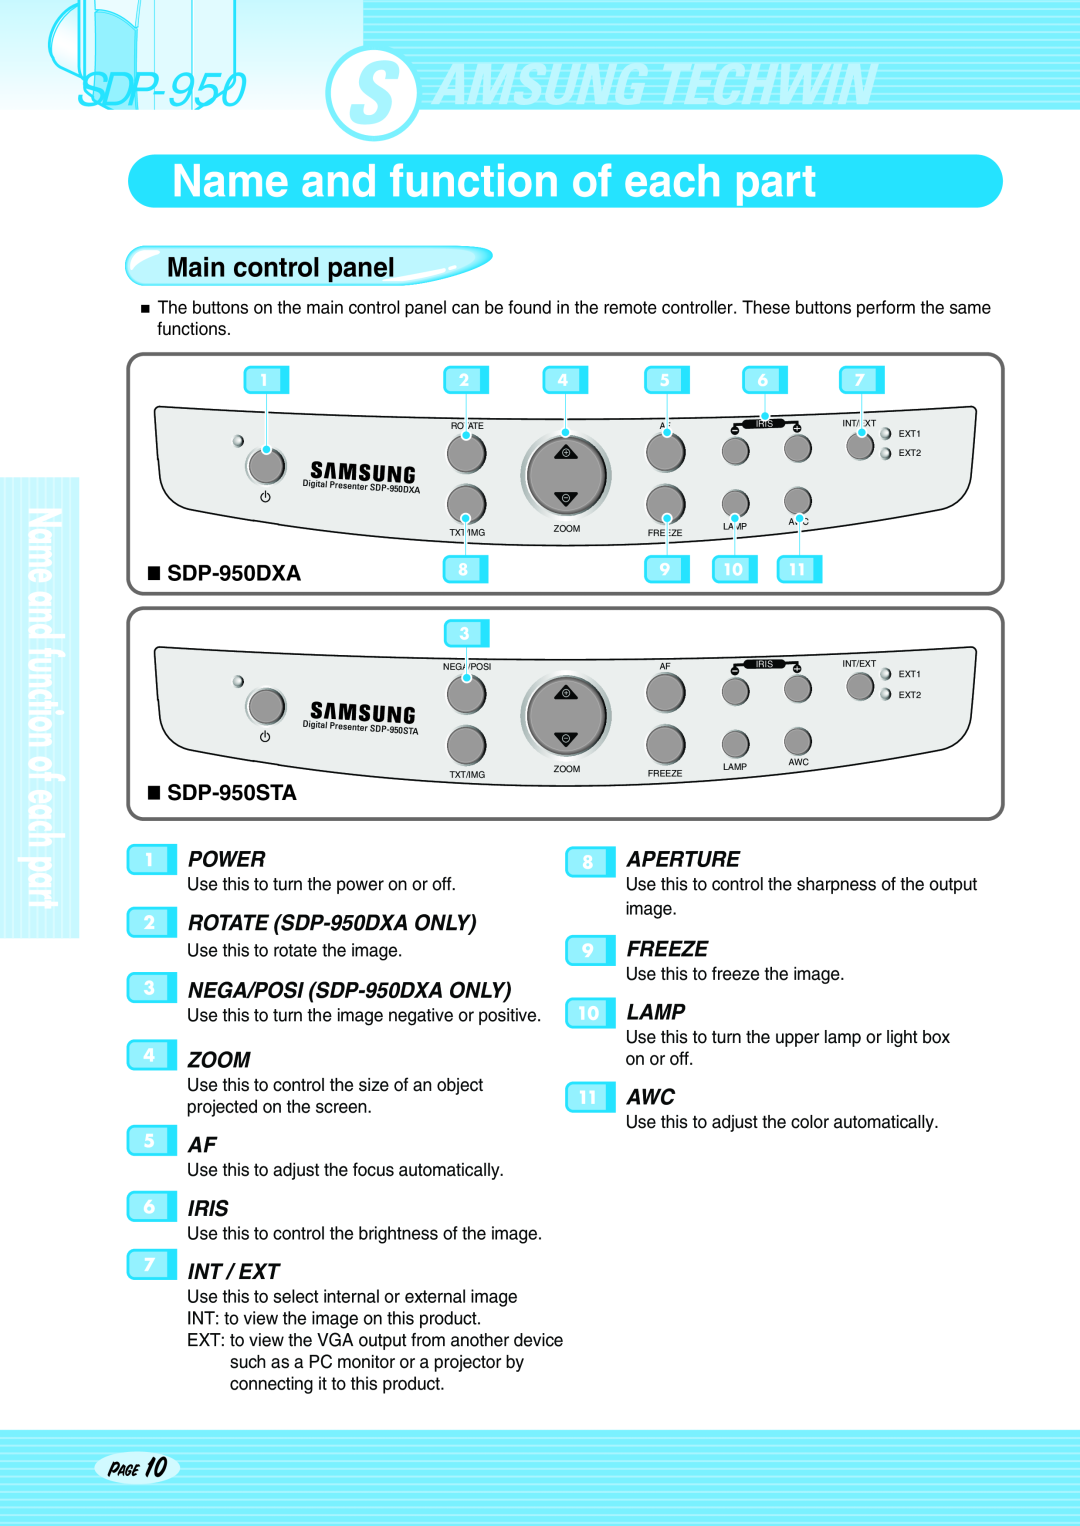 Altec Lansing SDP-950STA user manual Main control panel, SDP-950DXA, Name and function of each part 